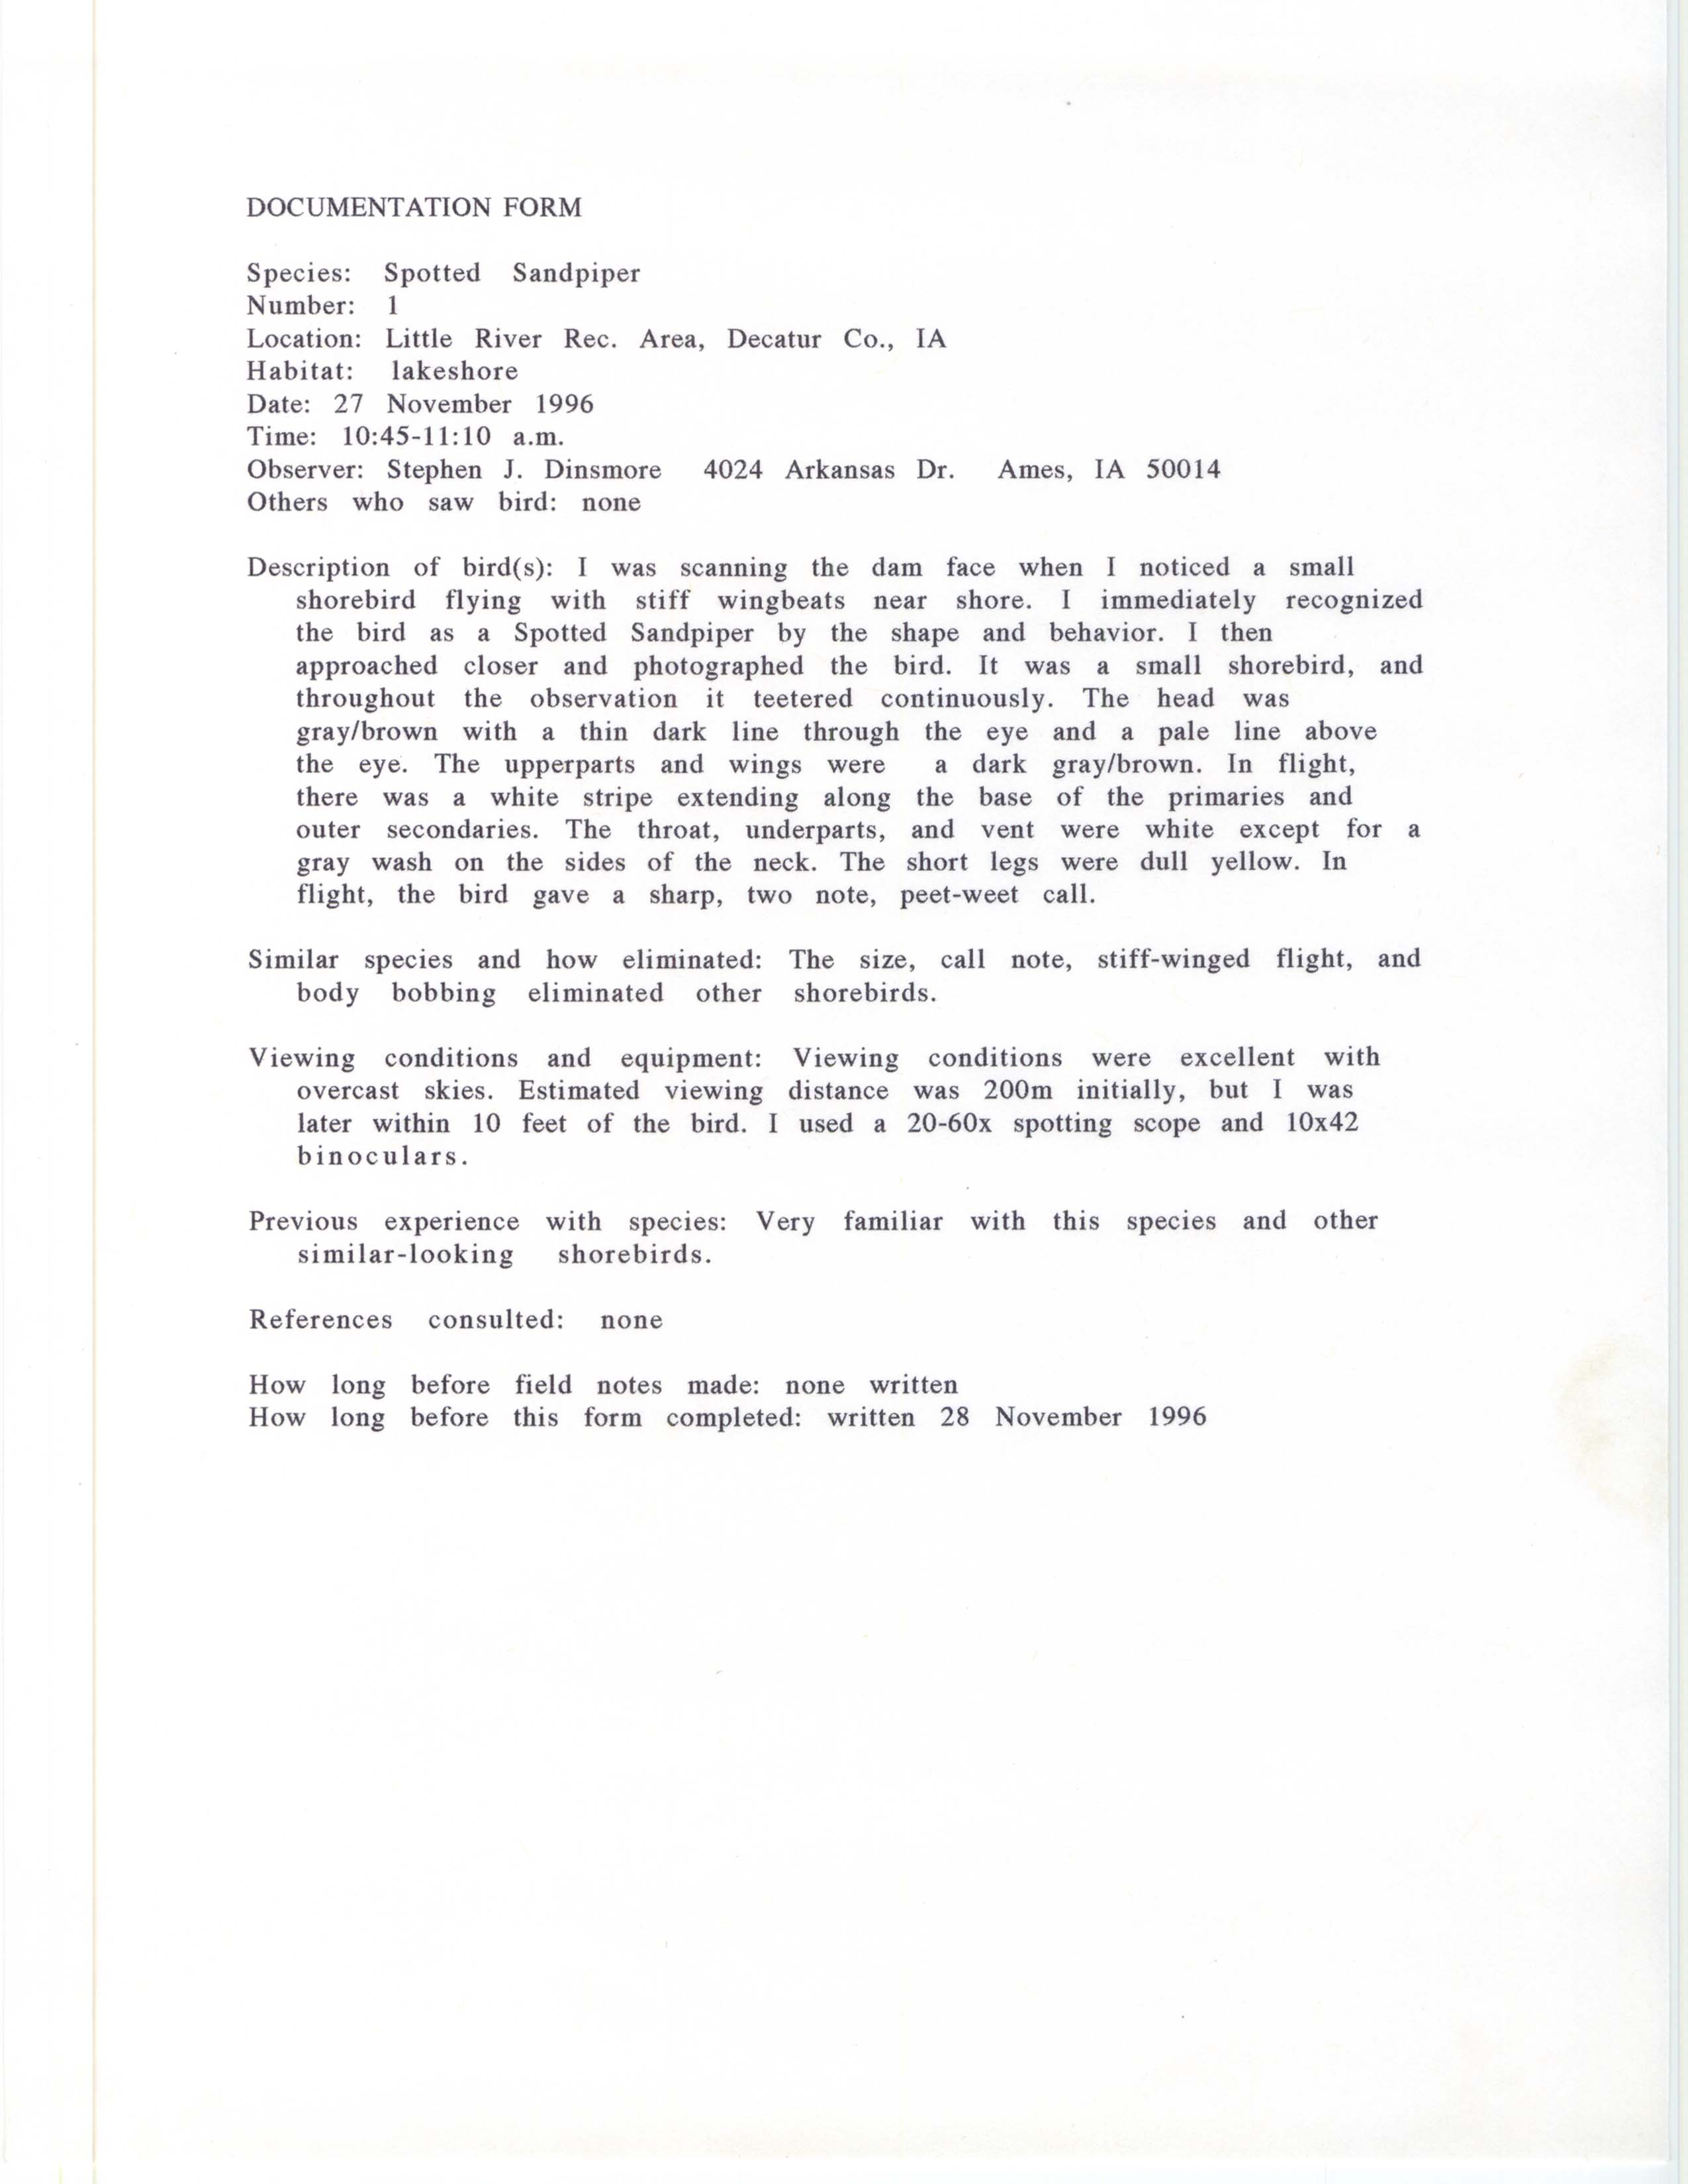 Rare bird documentation form for Spotted Sandpiper at Little River Recreation Area, 1996